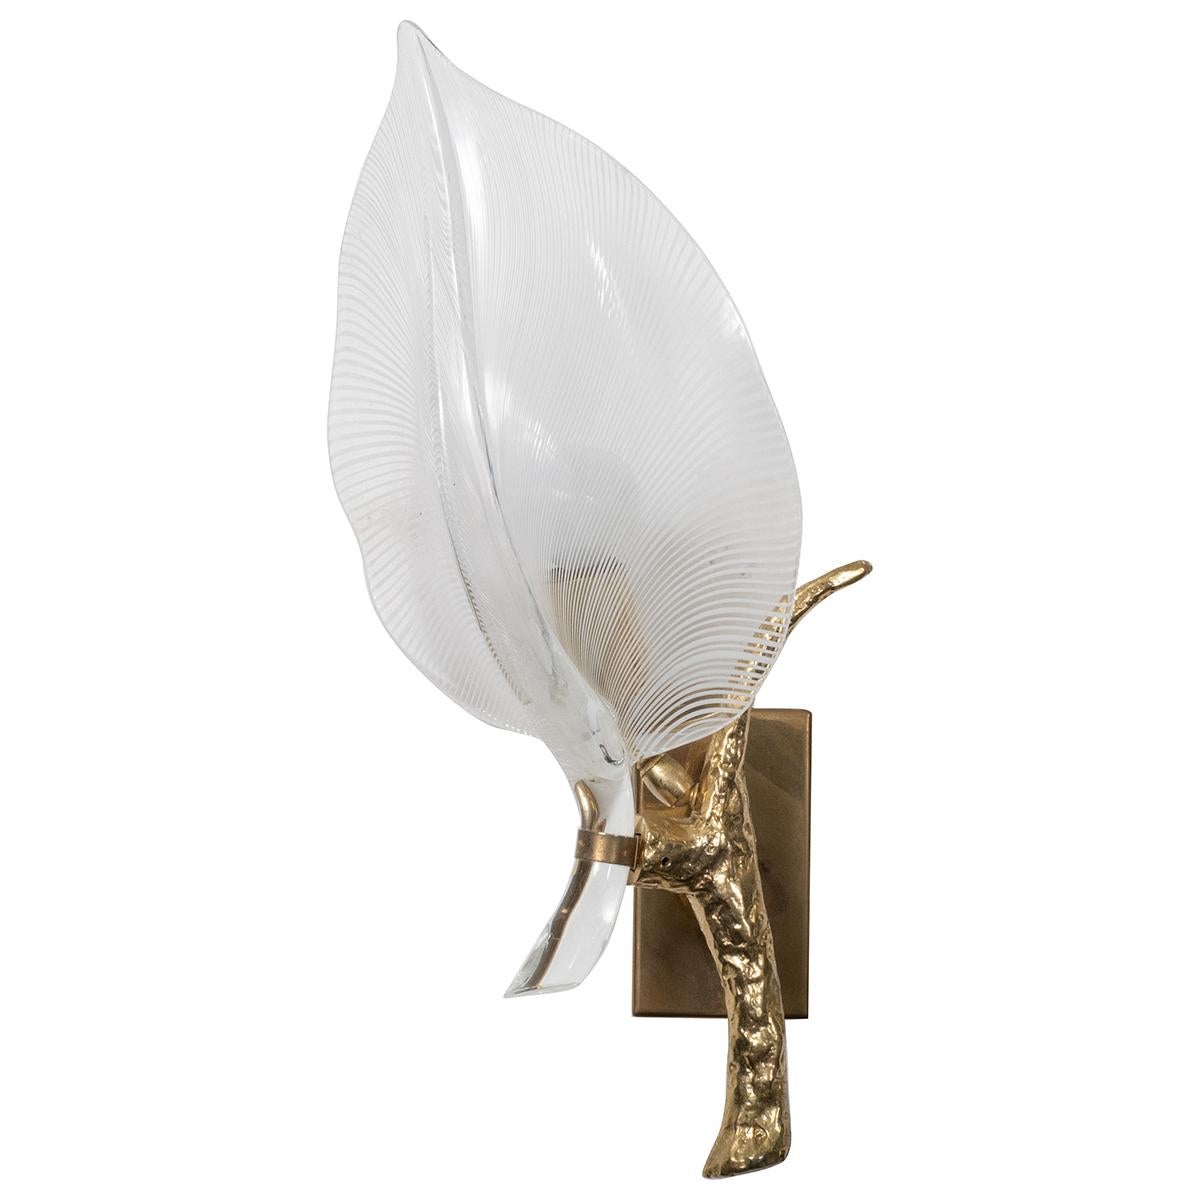 Single Murano glass leaf sconce featuring a detailed cast bronze branch frame.